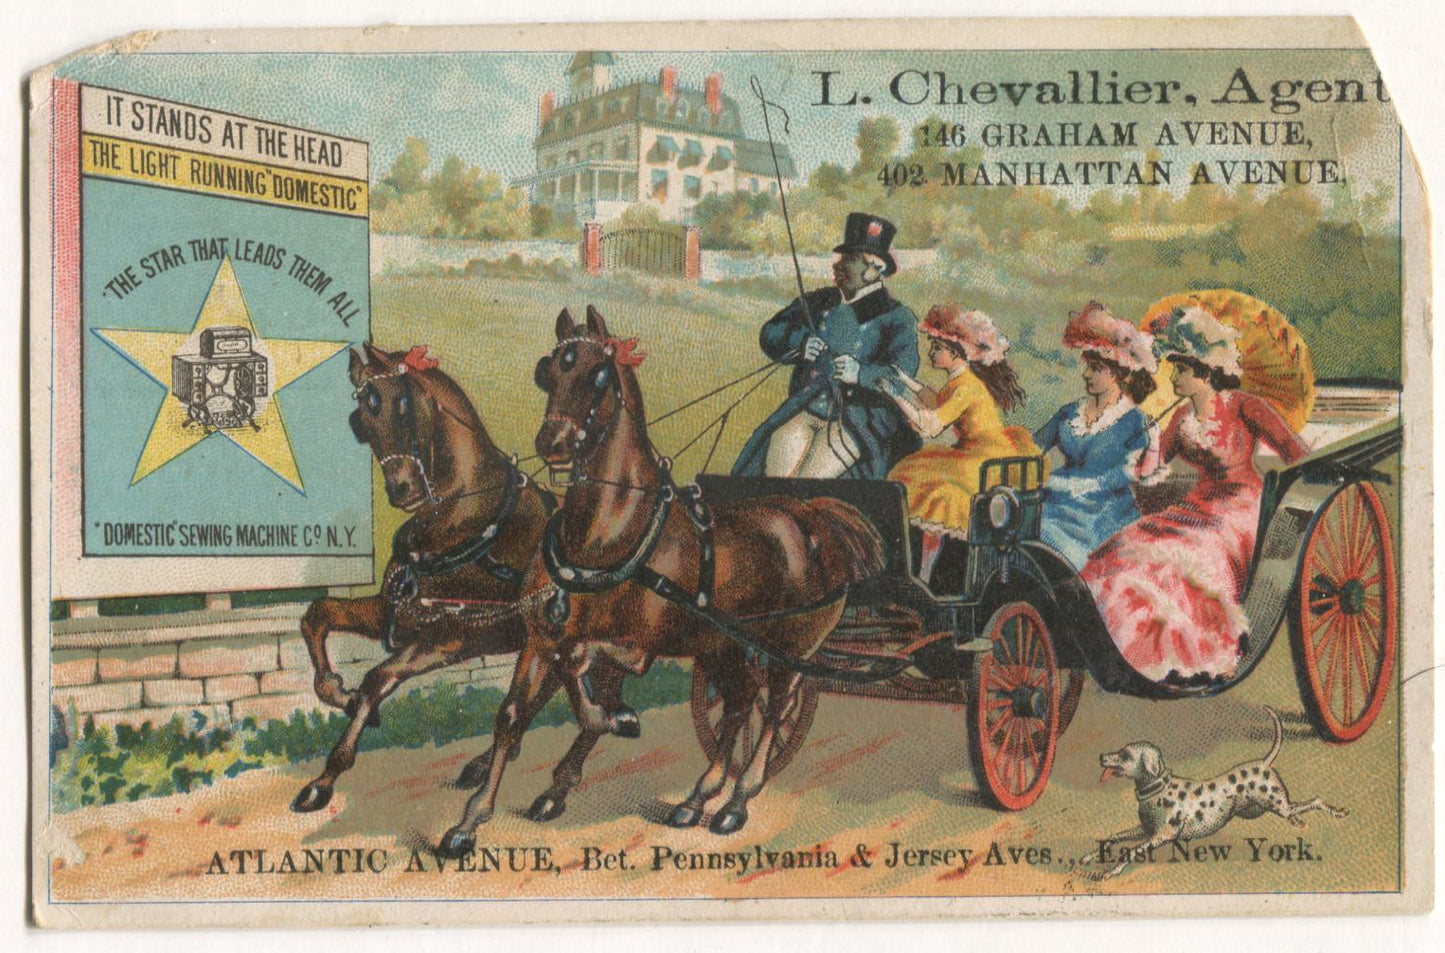 Domestic Sewing Machine Co. & L. Chevallier Antique Lithographed Trade Card